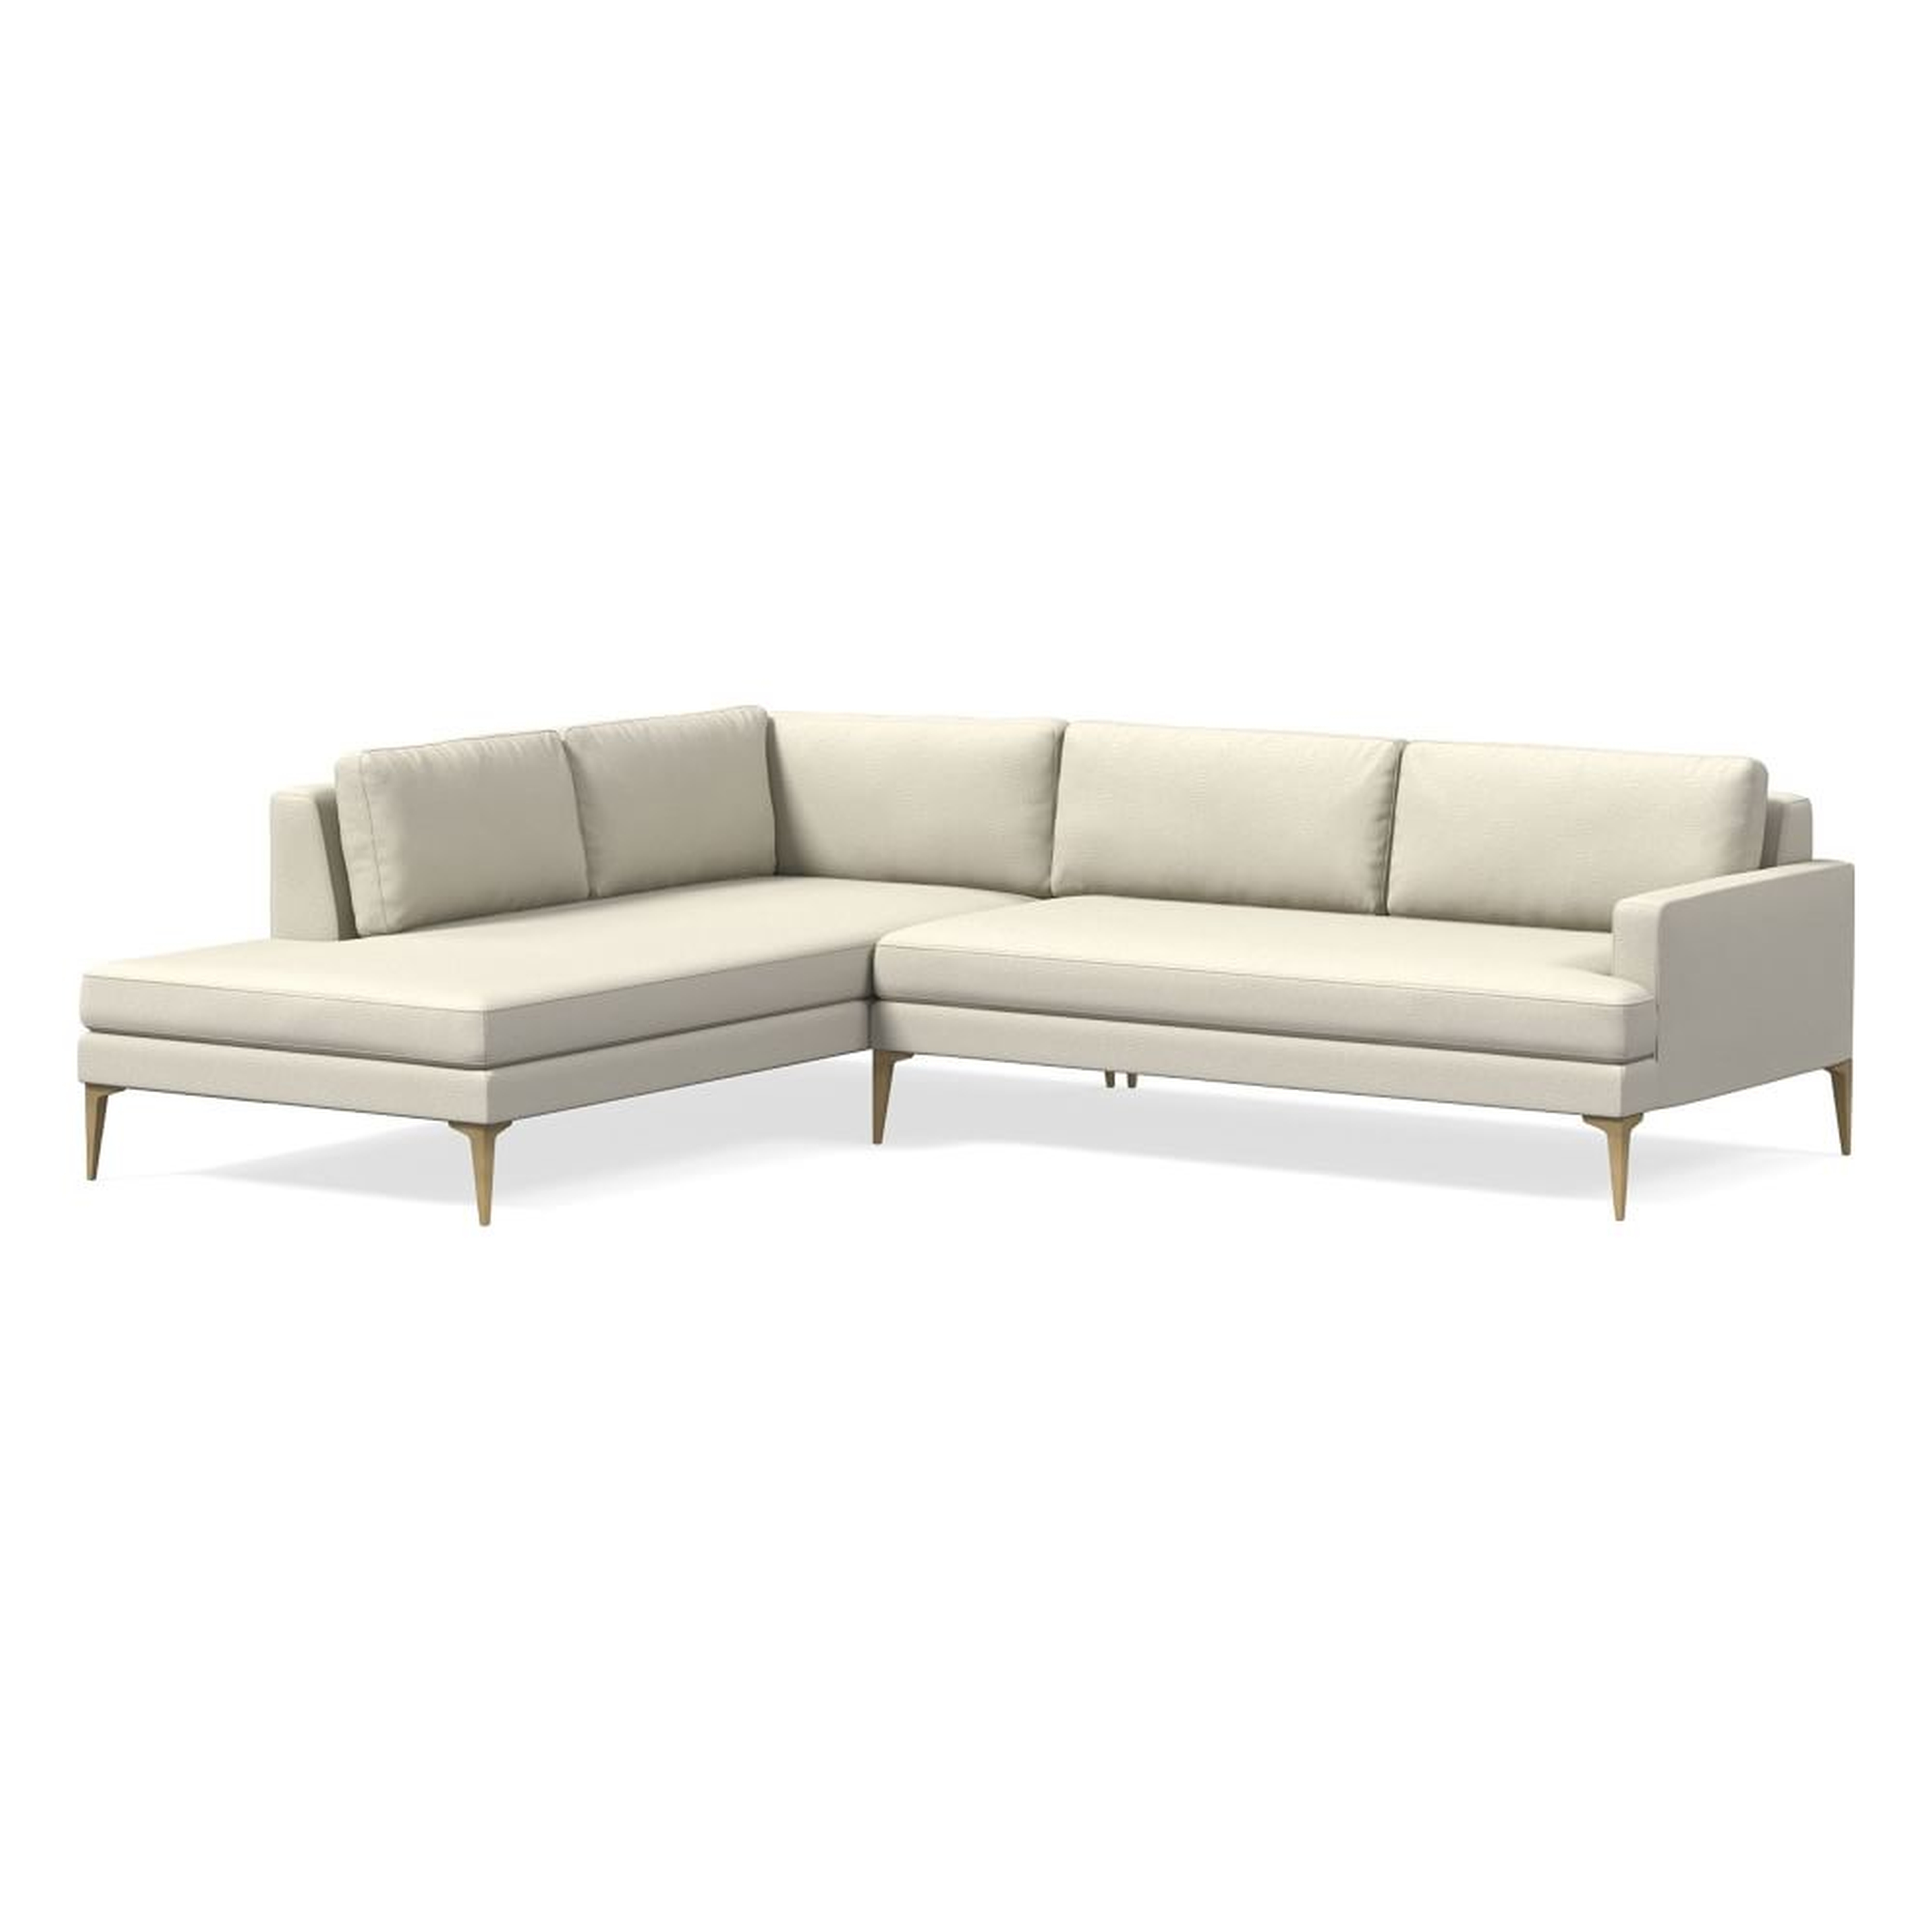 Andes 105" Left Multi Seat 2-Piece Bumper Chaise Sectional, Standard Depth, Performance Basketweave, Alabaster, BB - West Elm